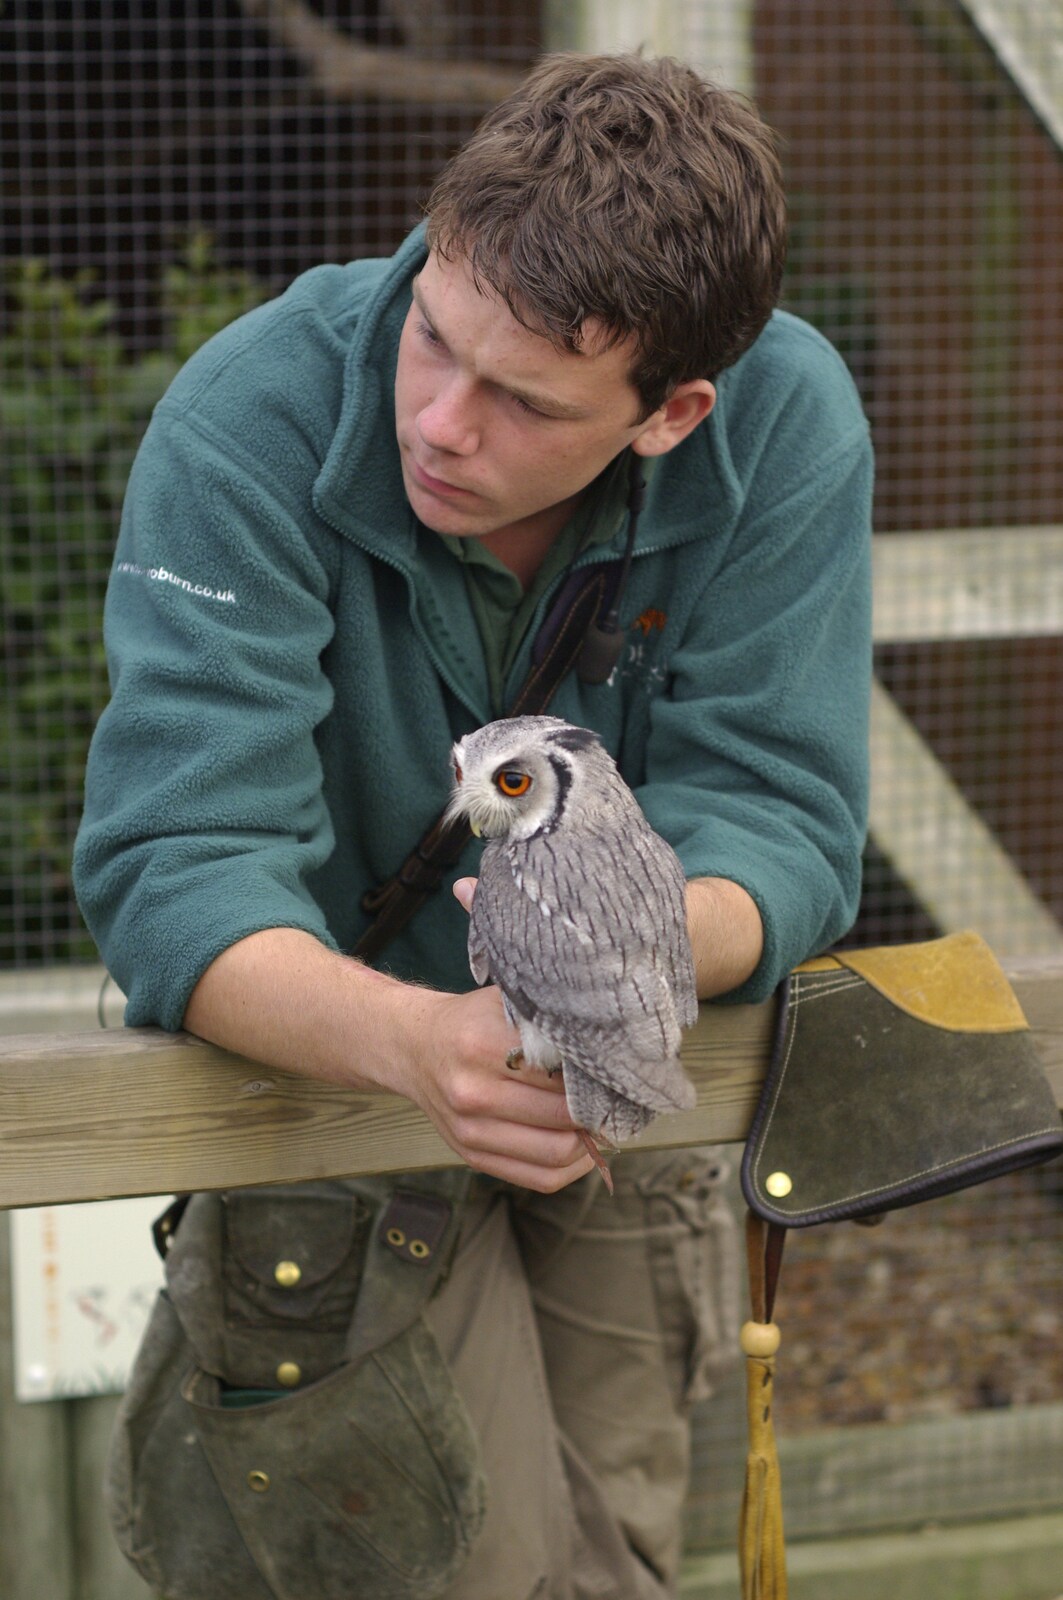 The owl guy waits with an owl from The BBs in a Garden, and a Qualcomm Safari, Woburn, Bedfordshire - 22nd July 2007